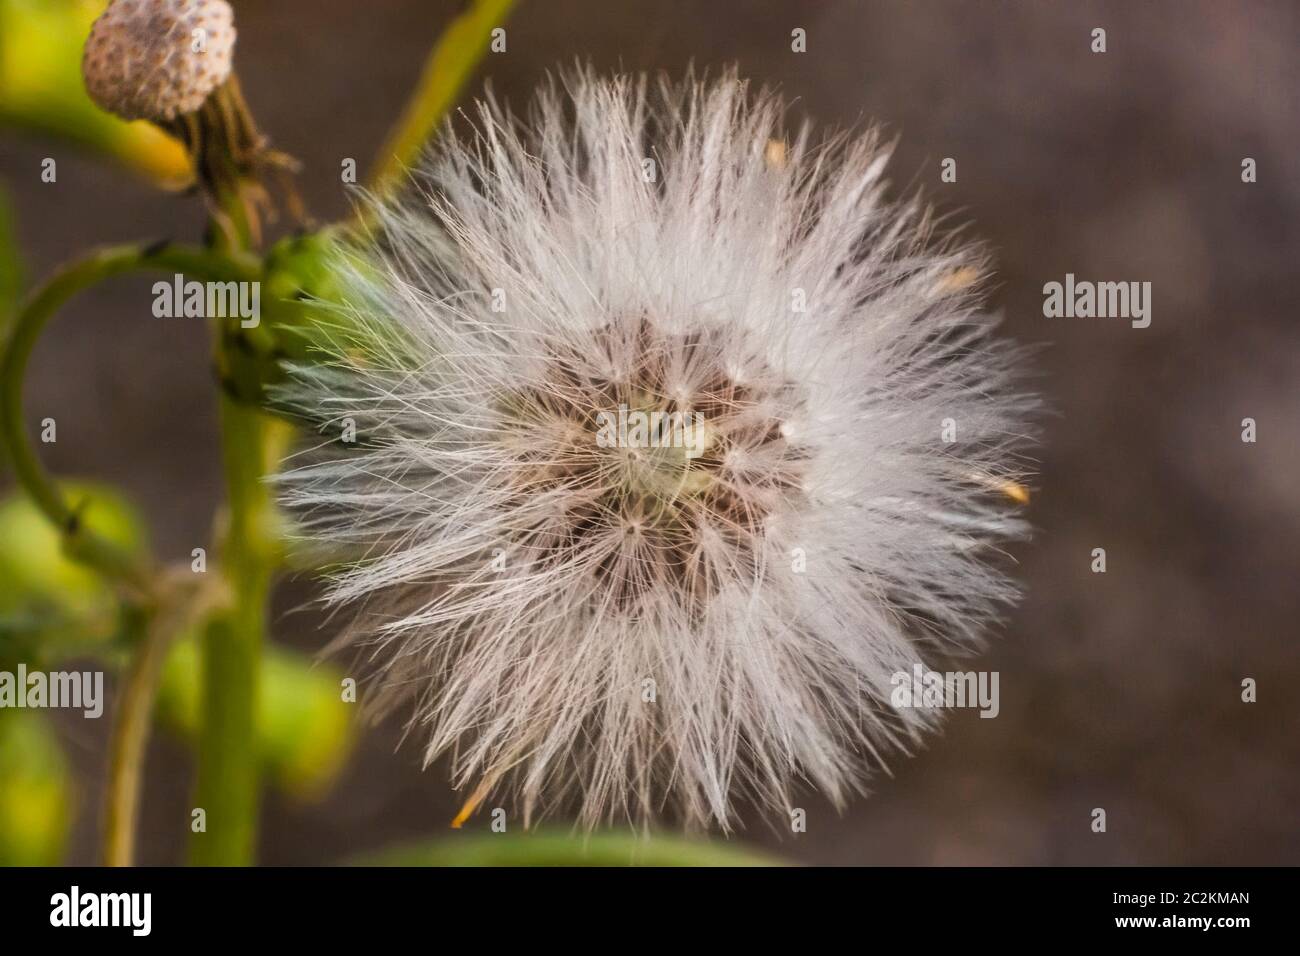 Magnification of a flower of Taraxacum in its phase infructescence. Stock Photo